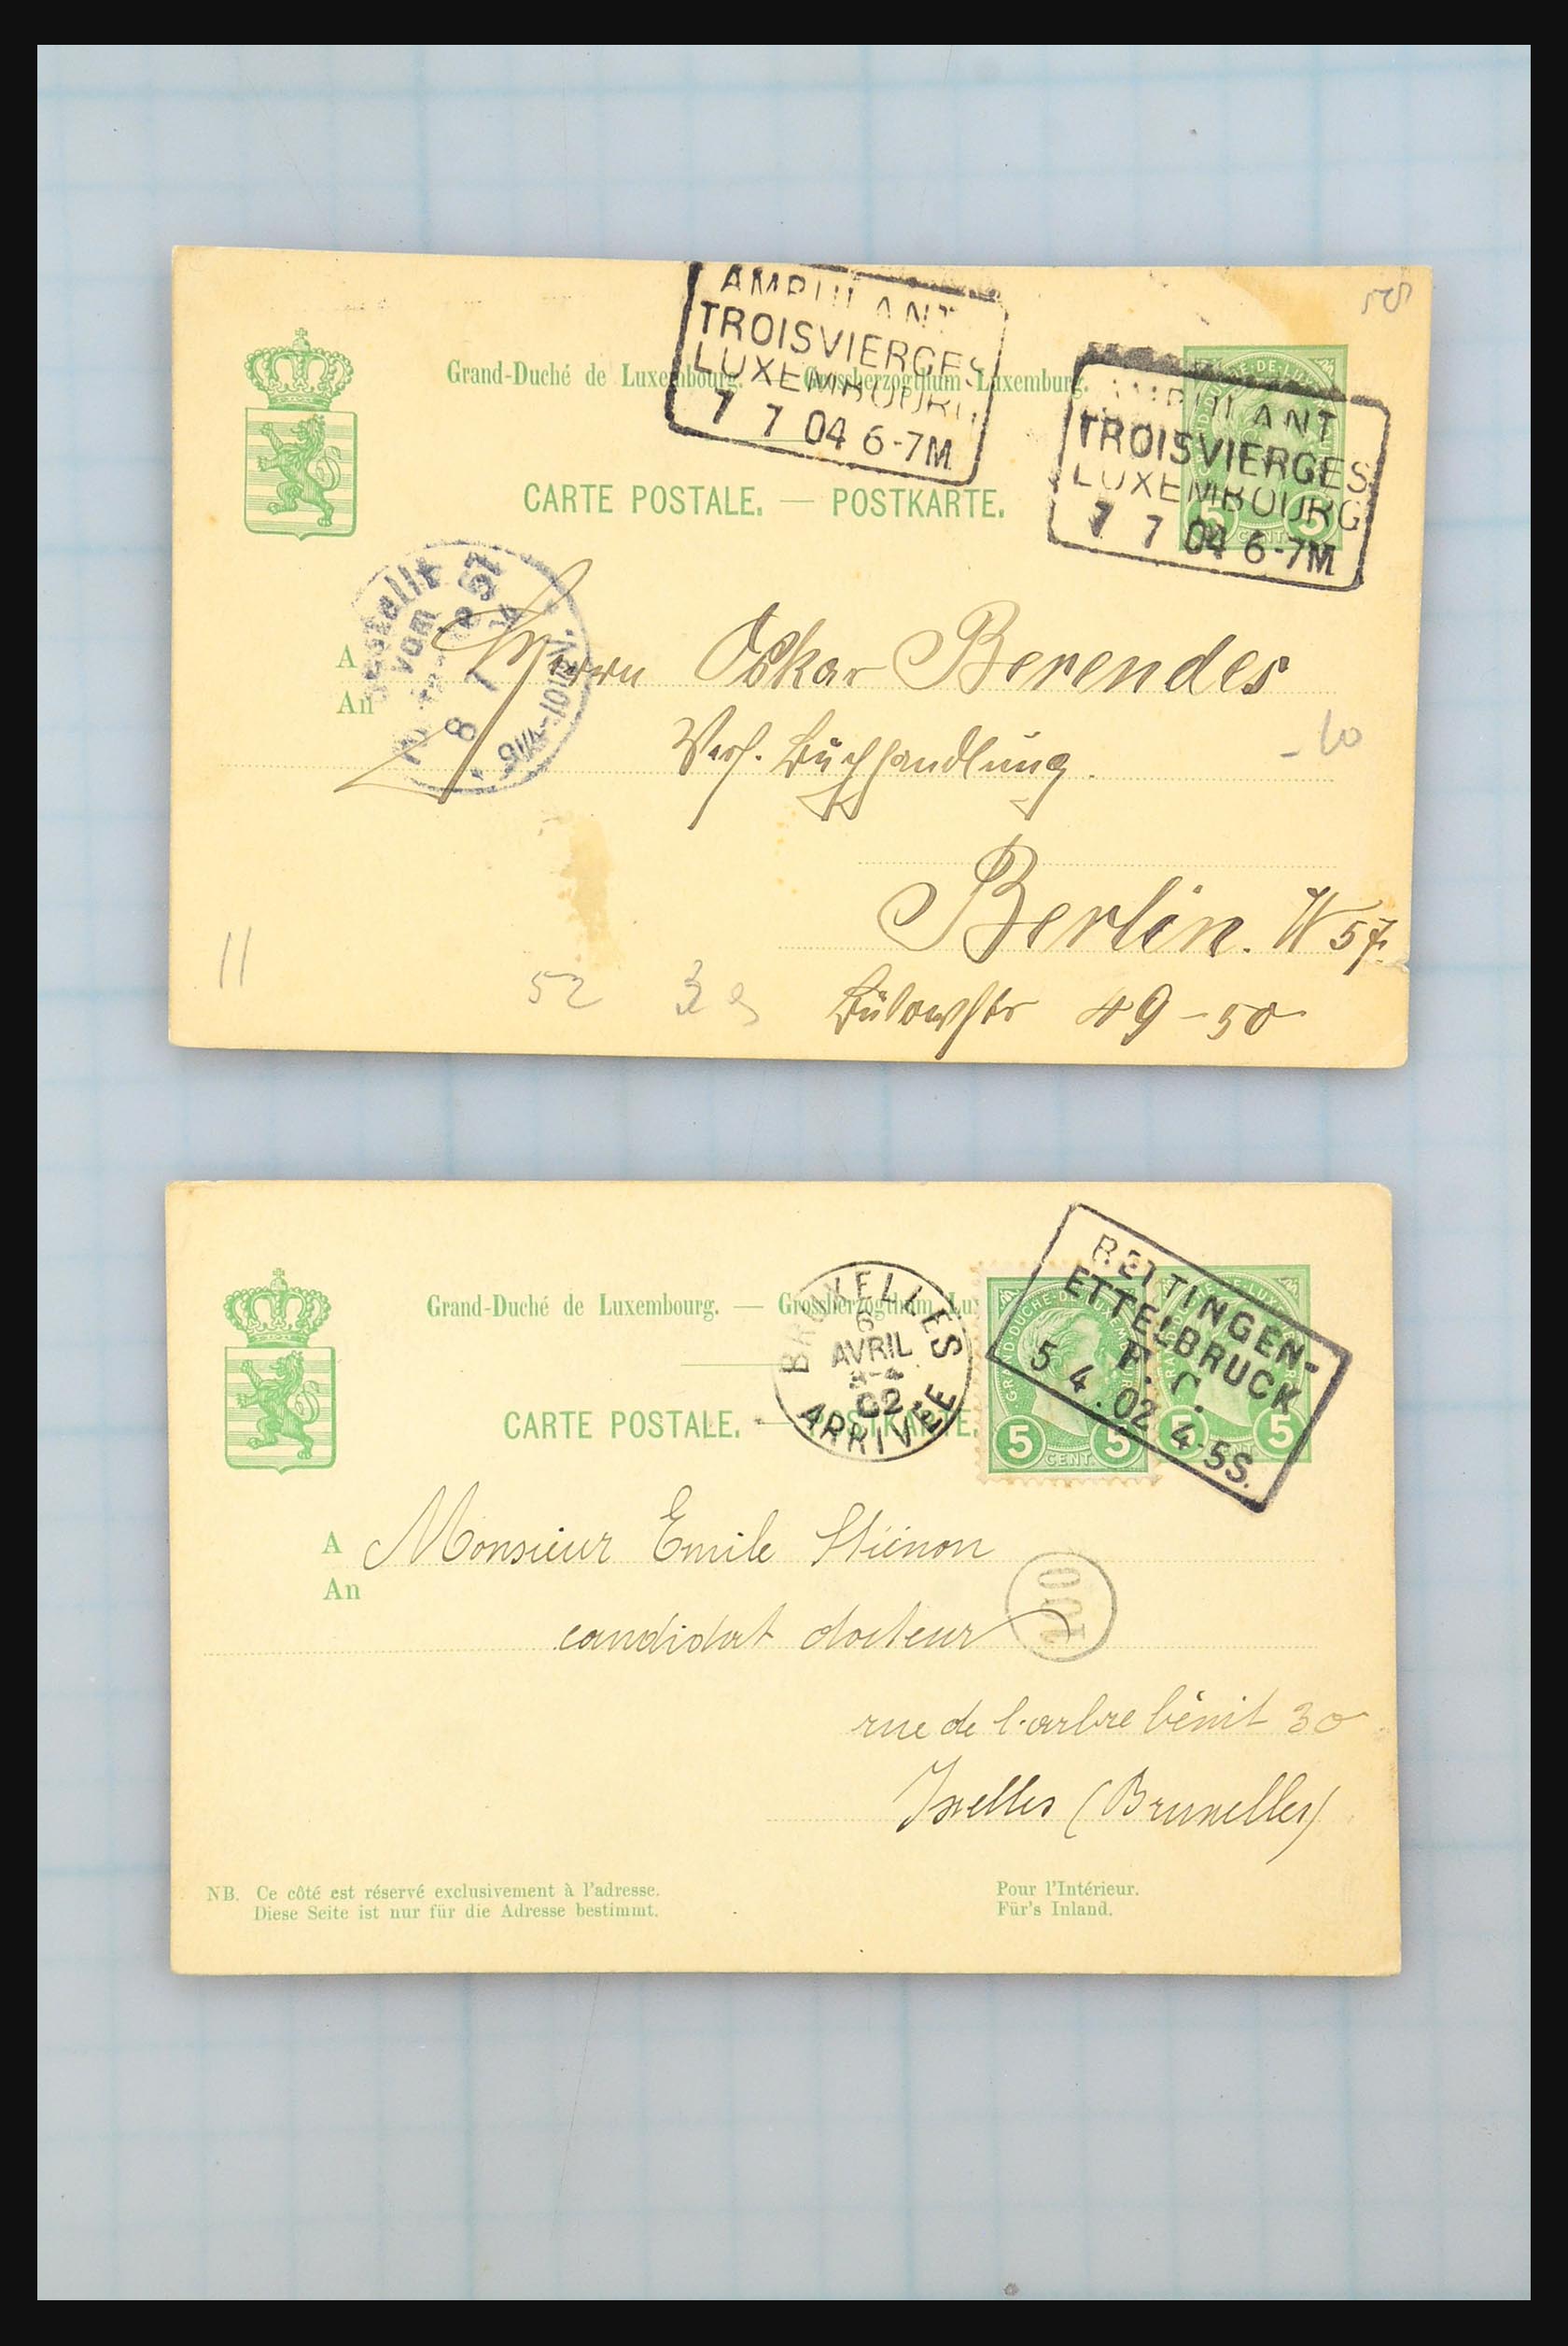 31358 092 - 31358 Portugal/Luxemburg/Greece covers 1880-1960.